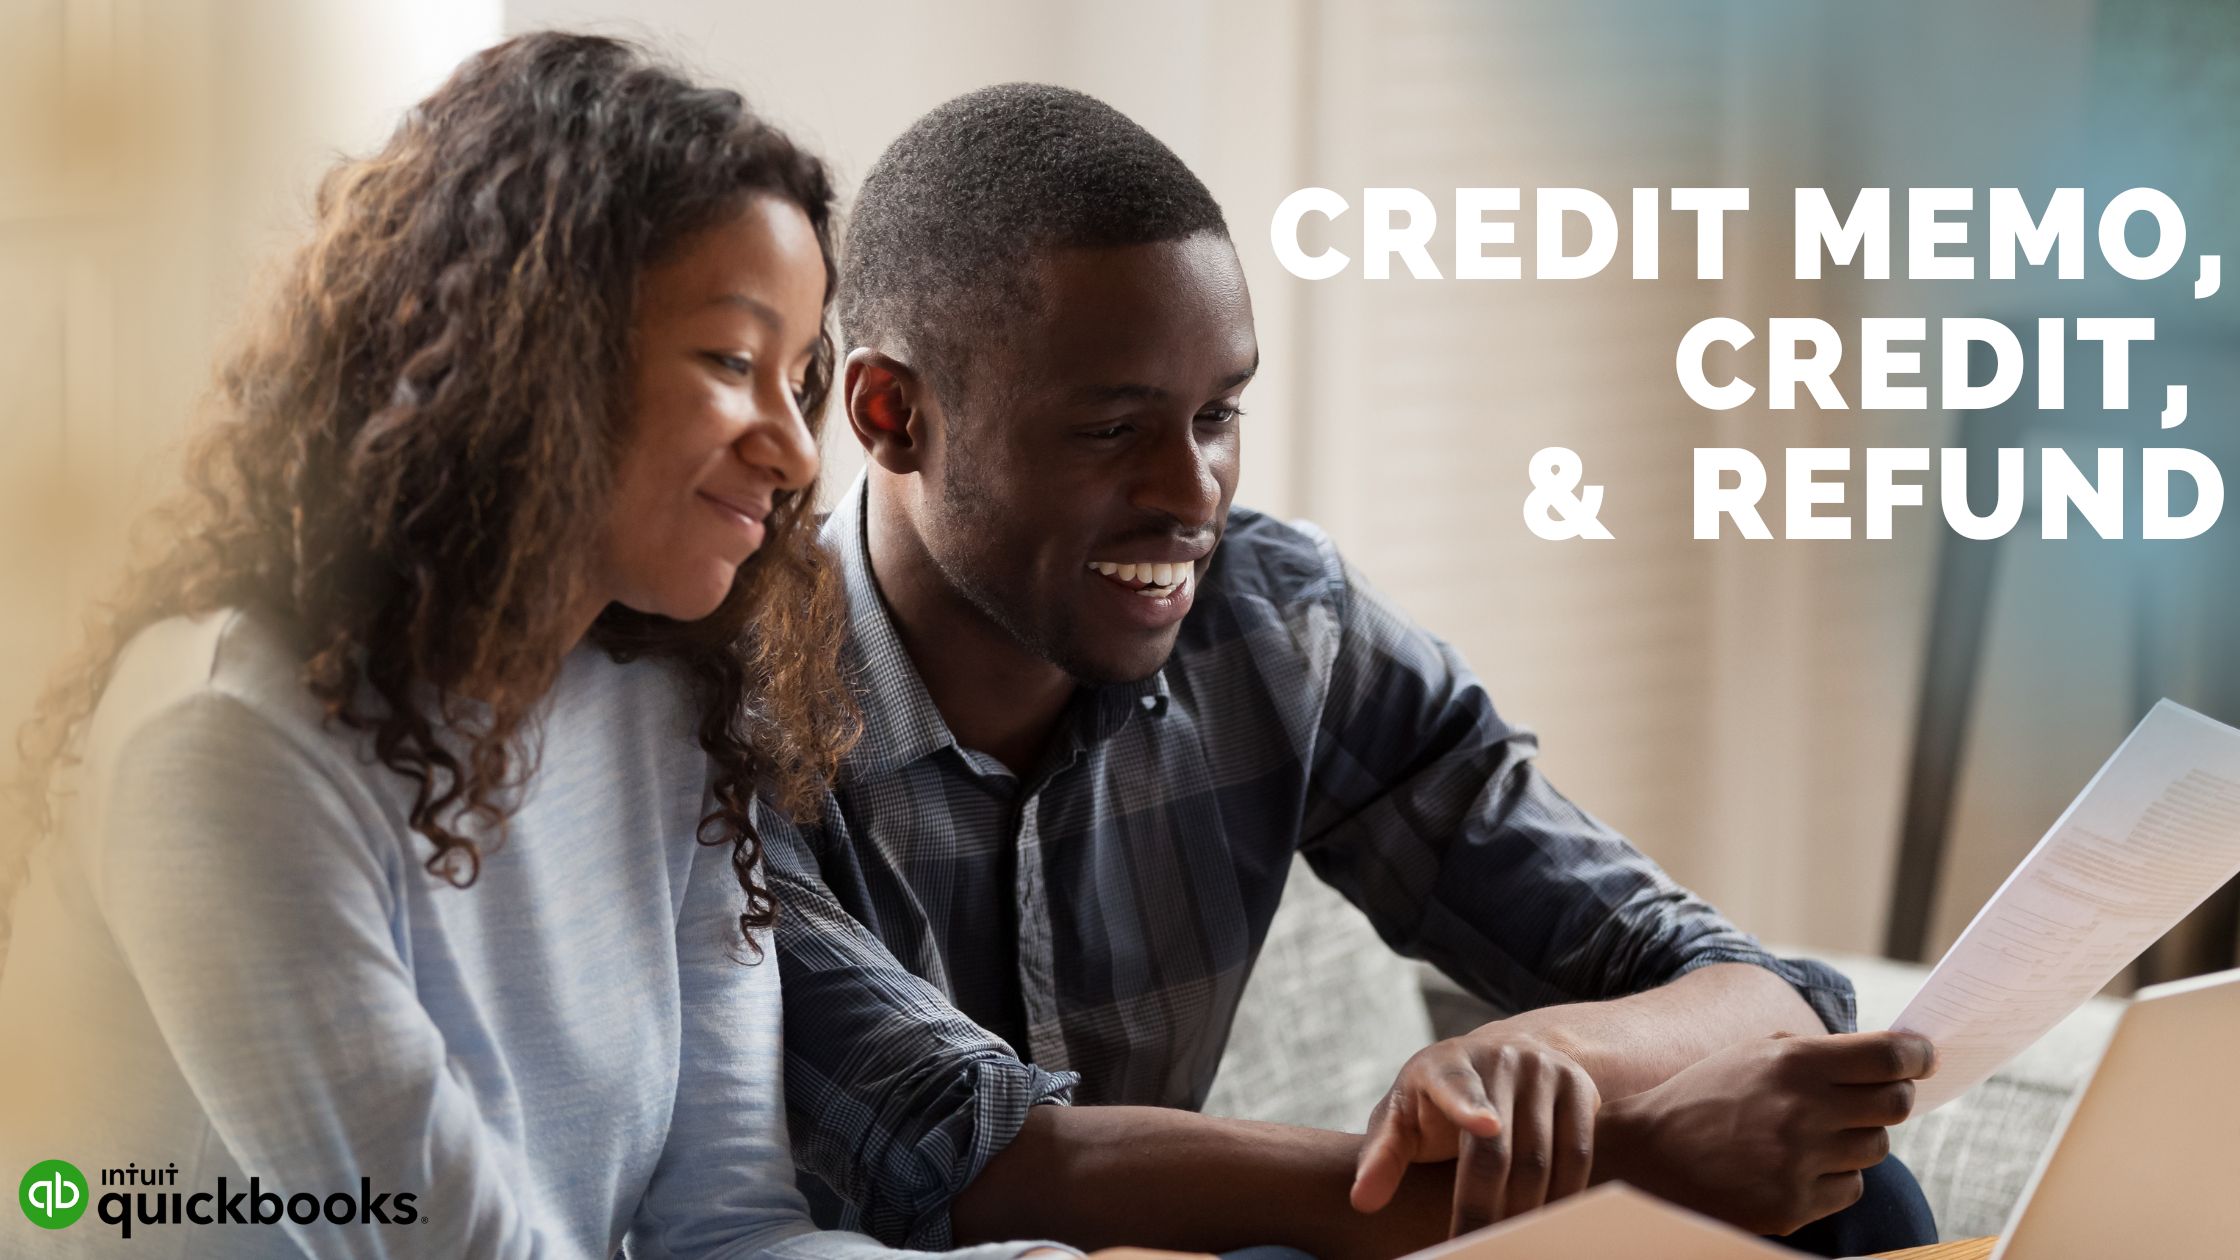 Credit Memo, Credit, and a Refund